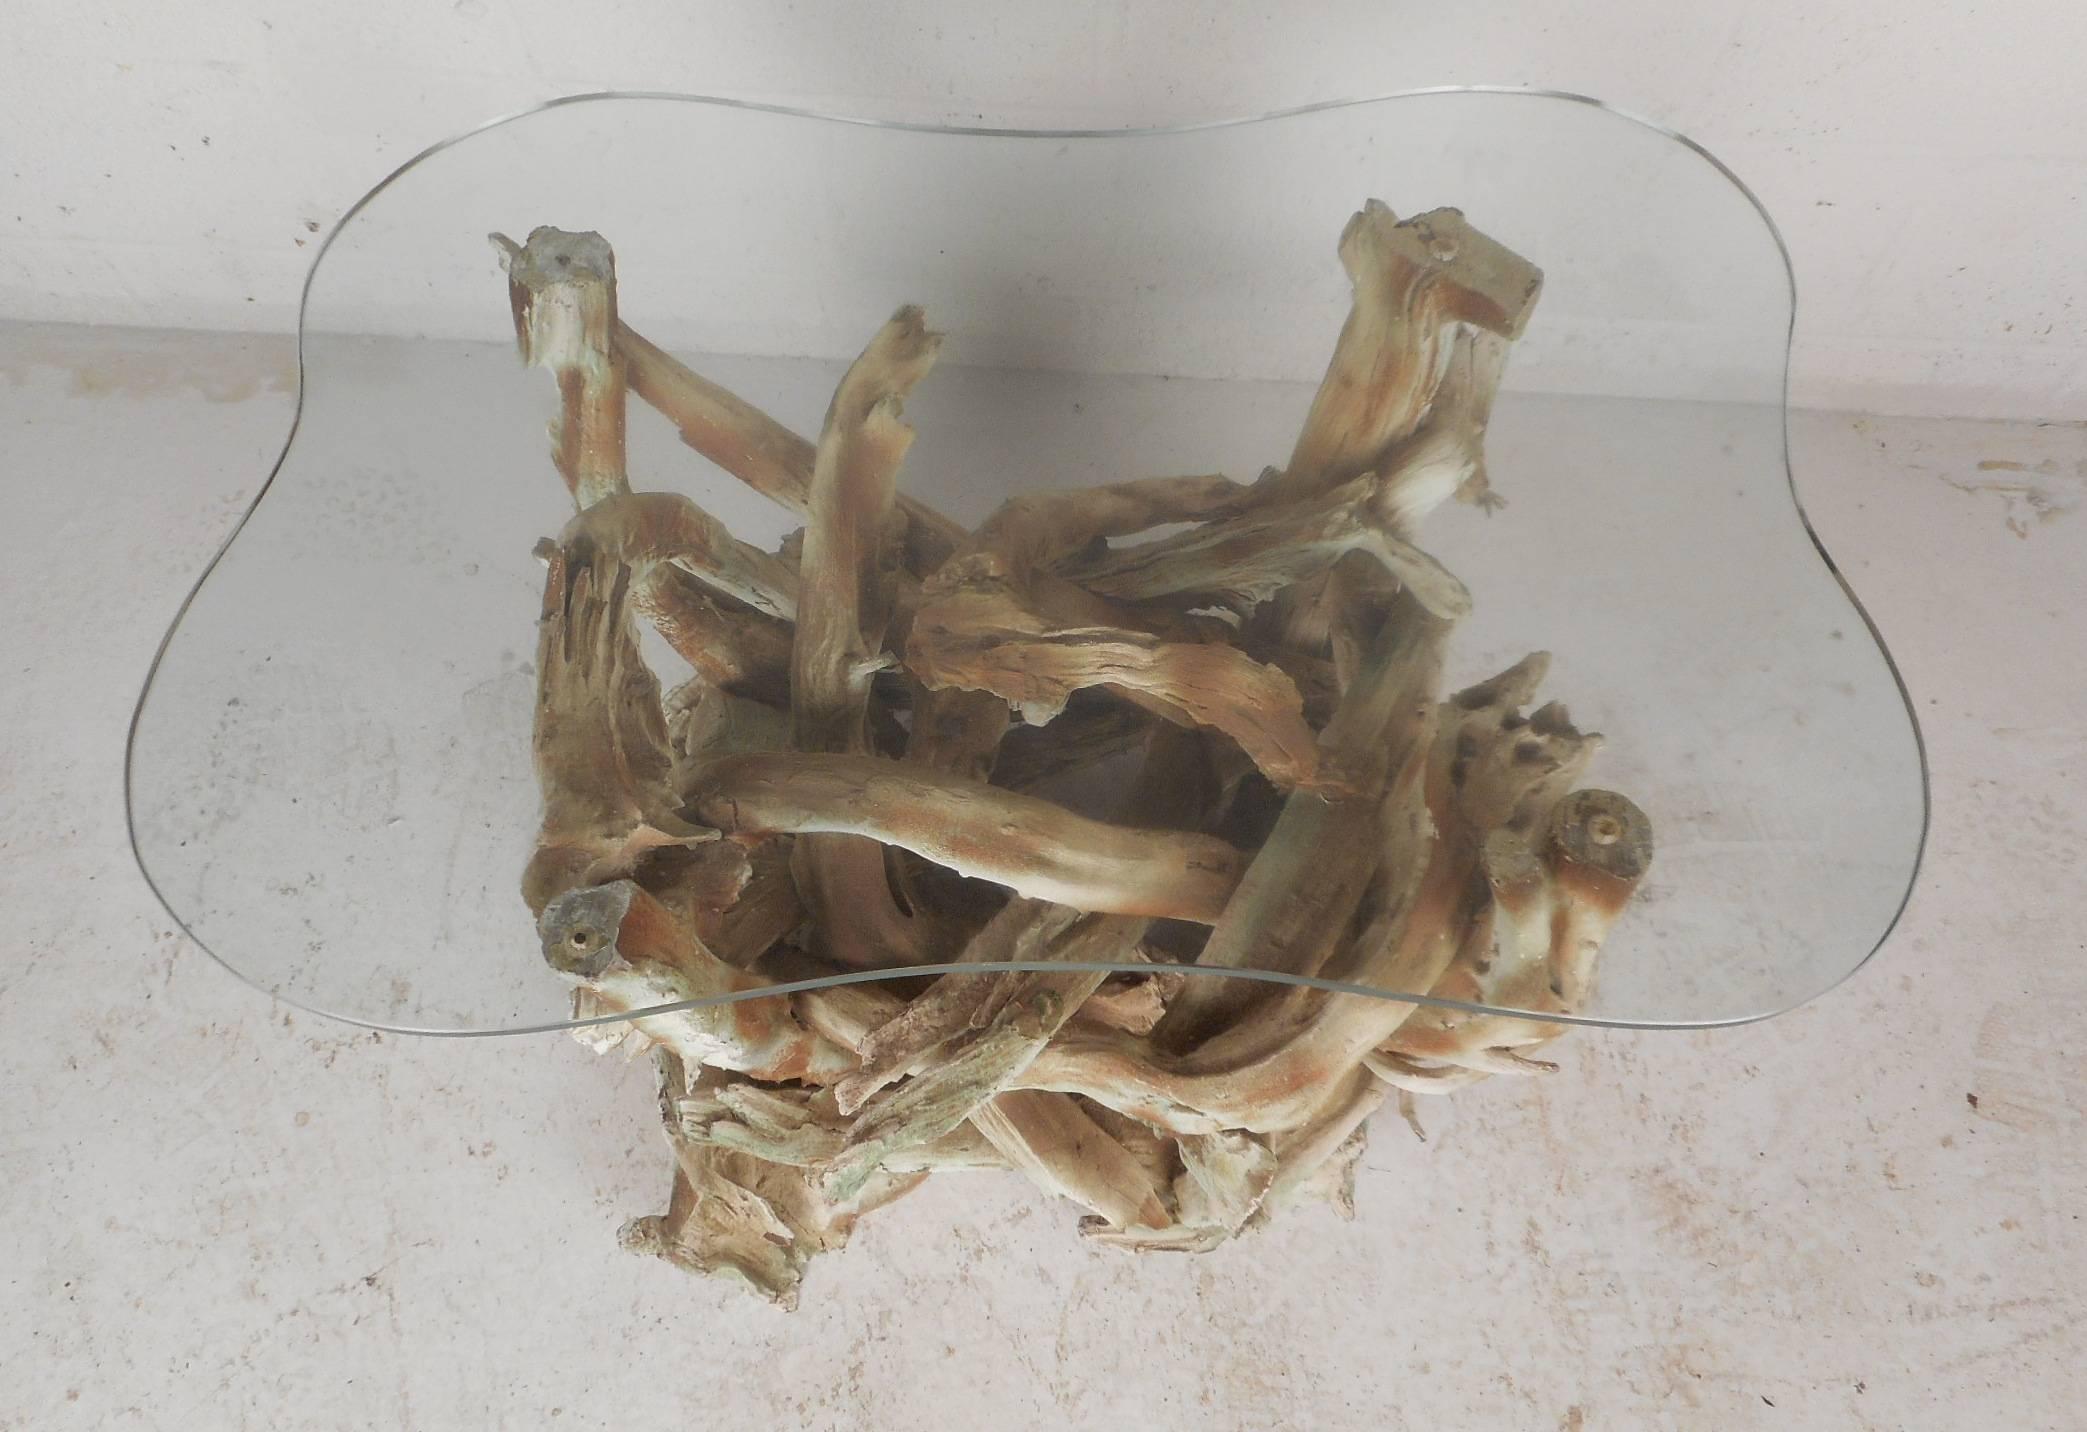 driftwood tables for sale